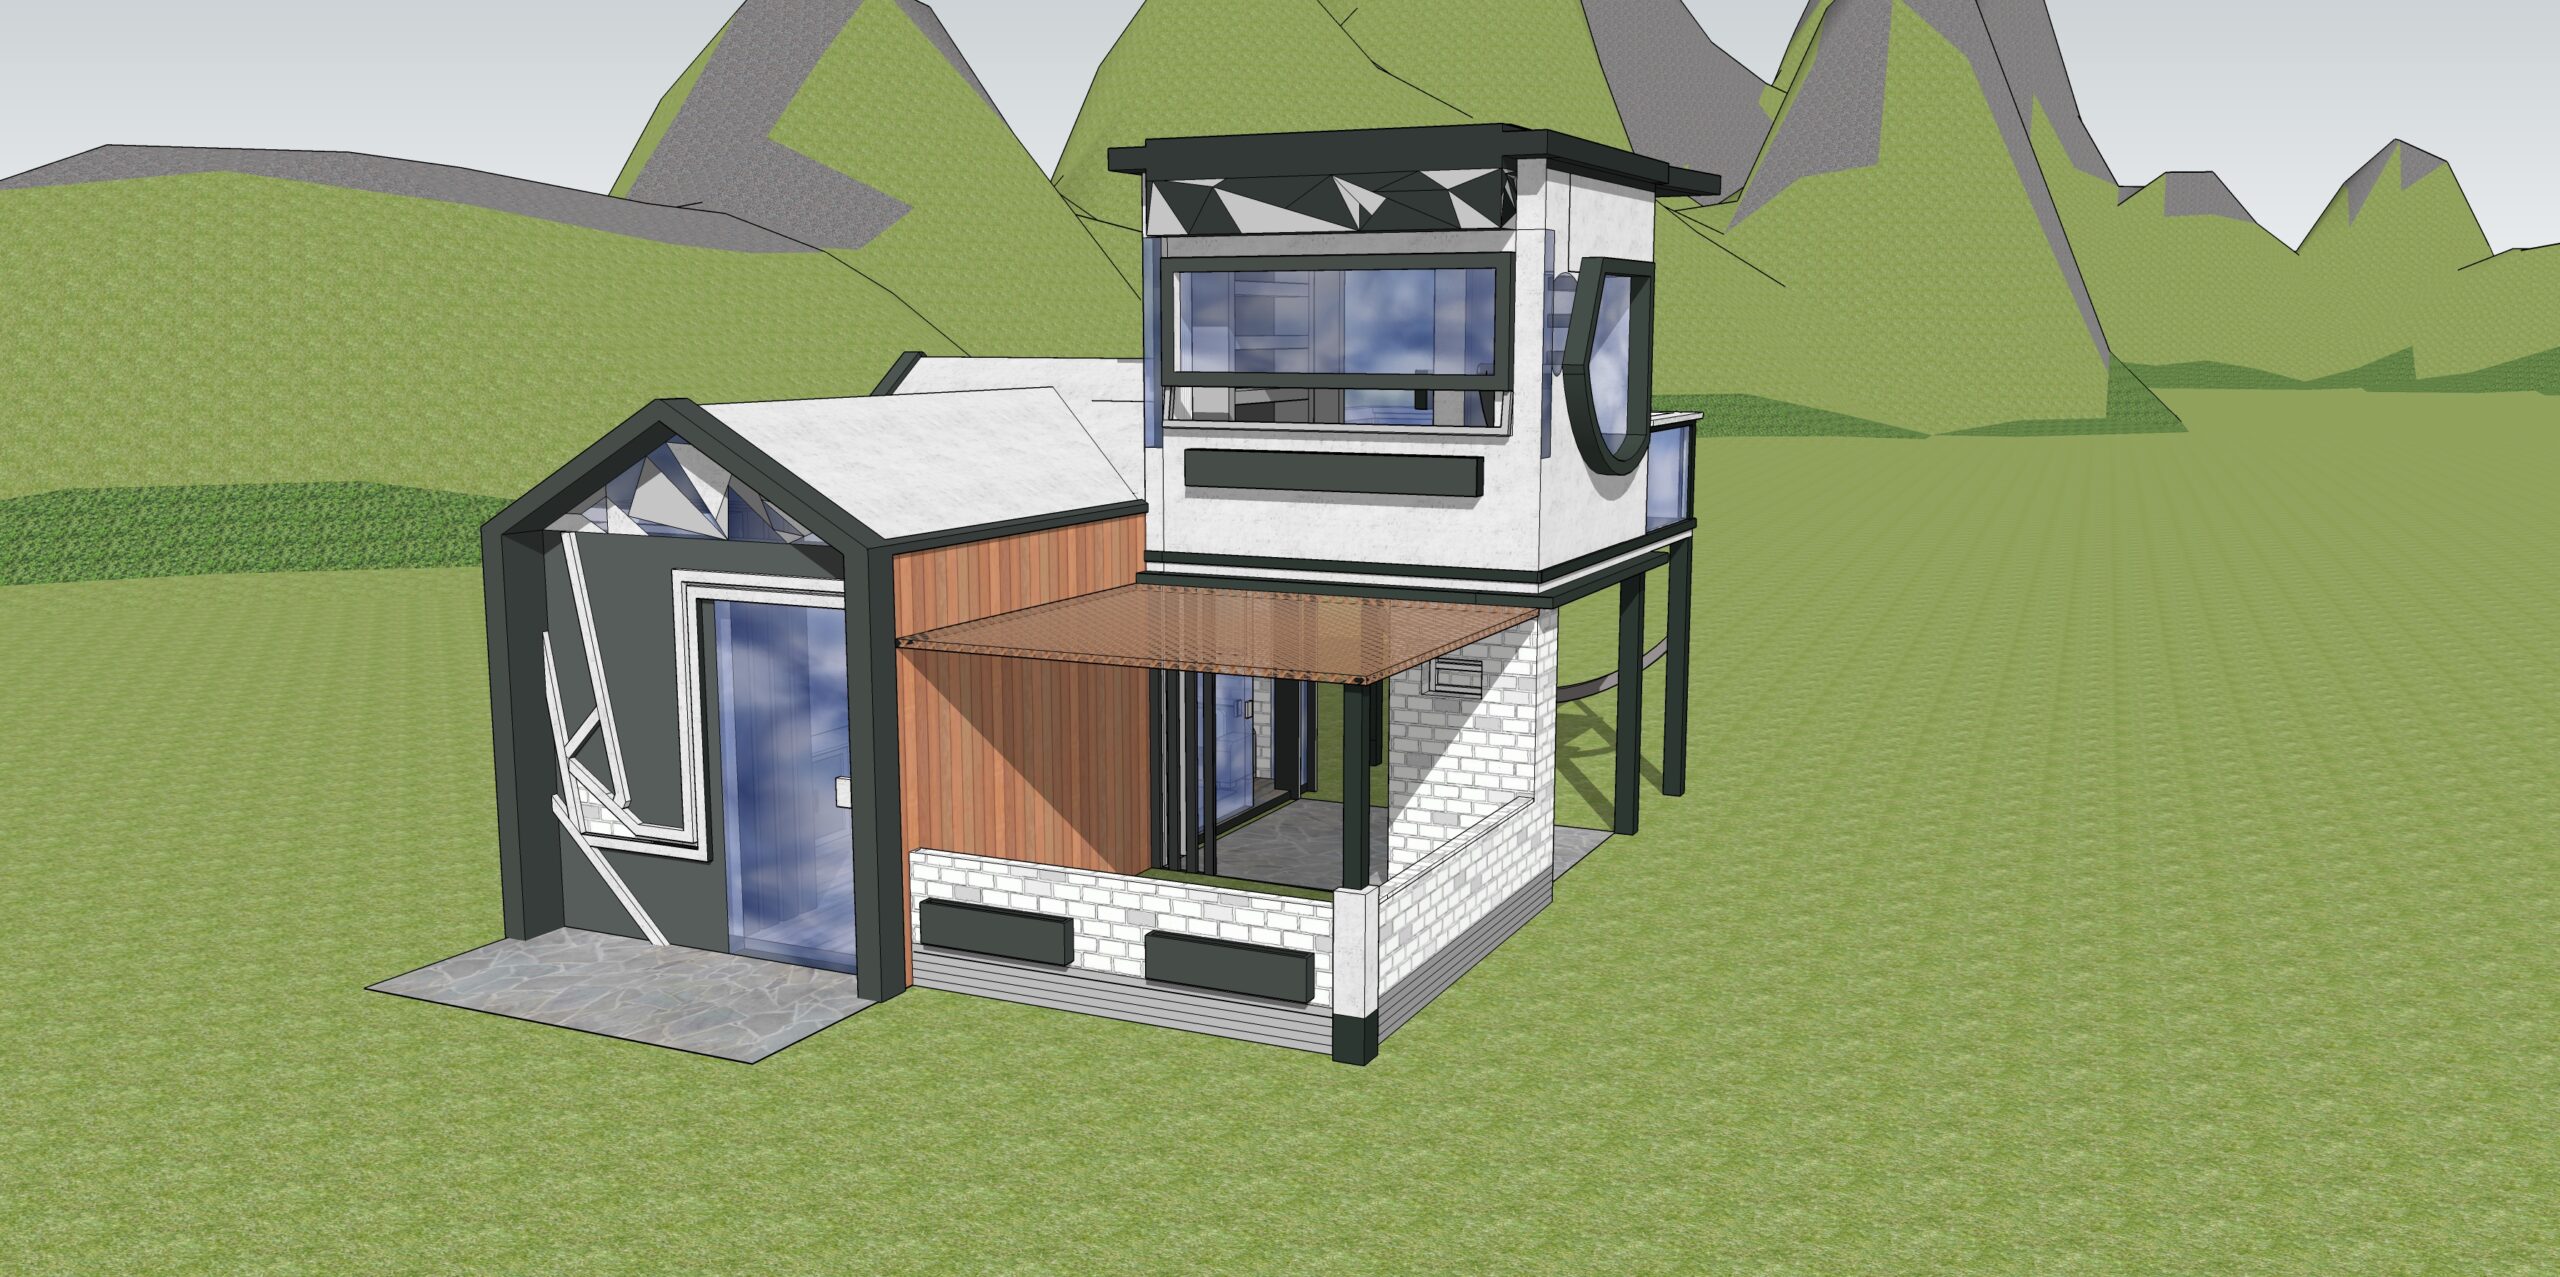 Digital model of a small white and wooden house with black trim